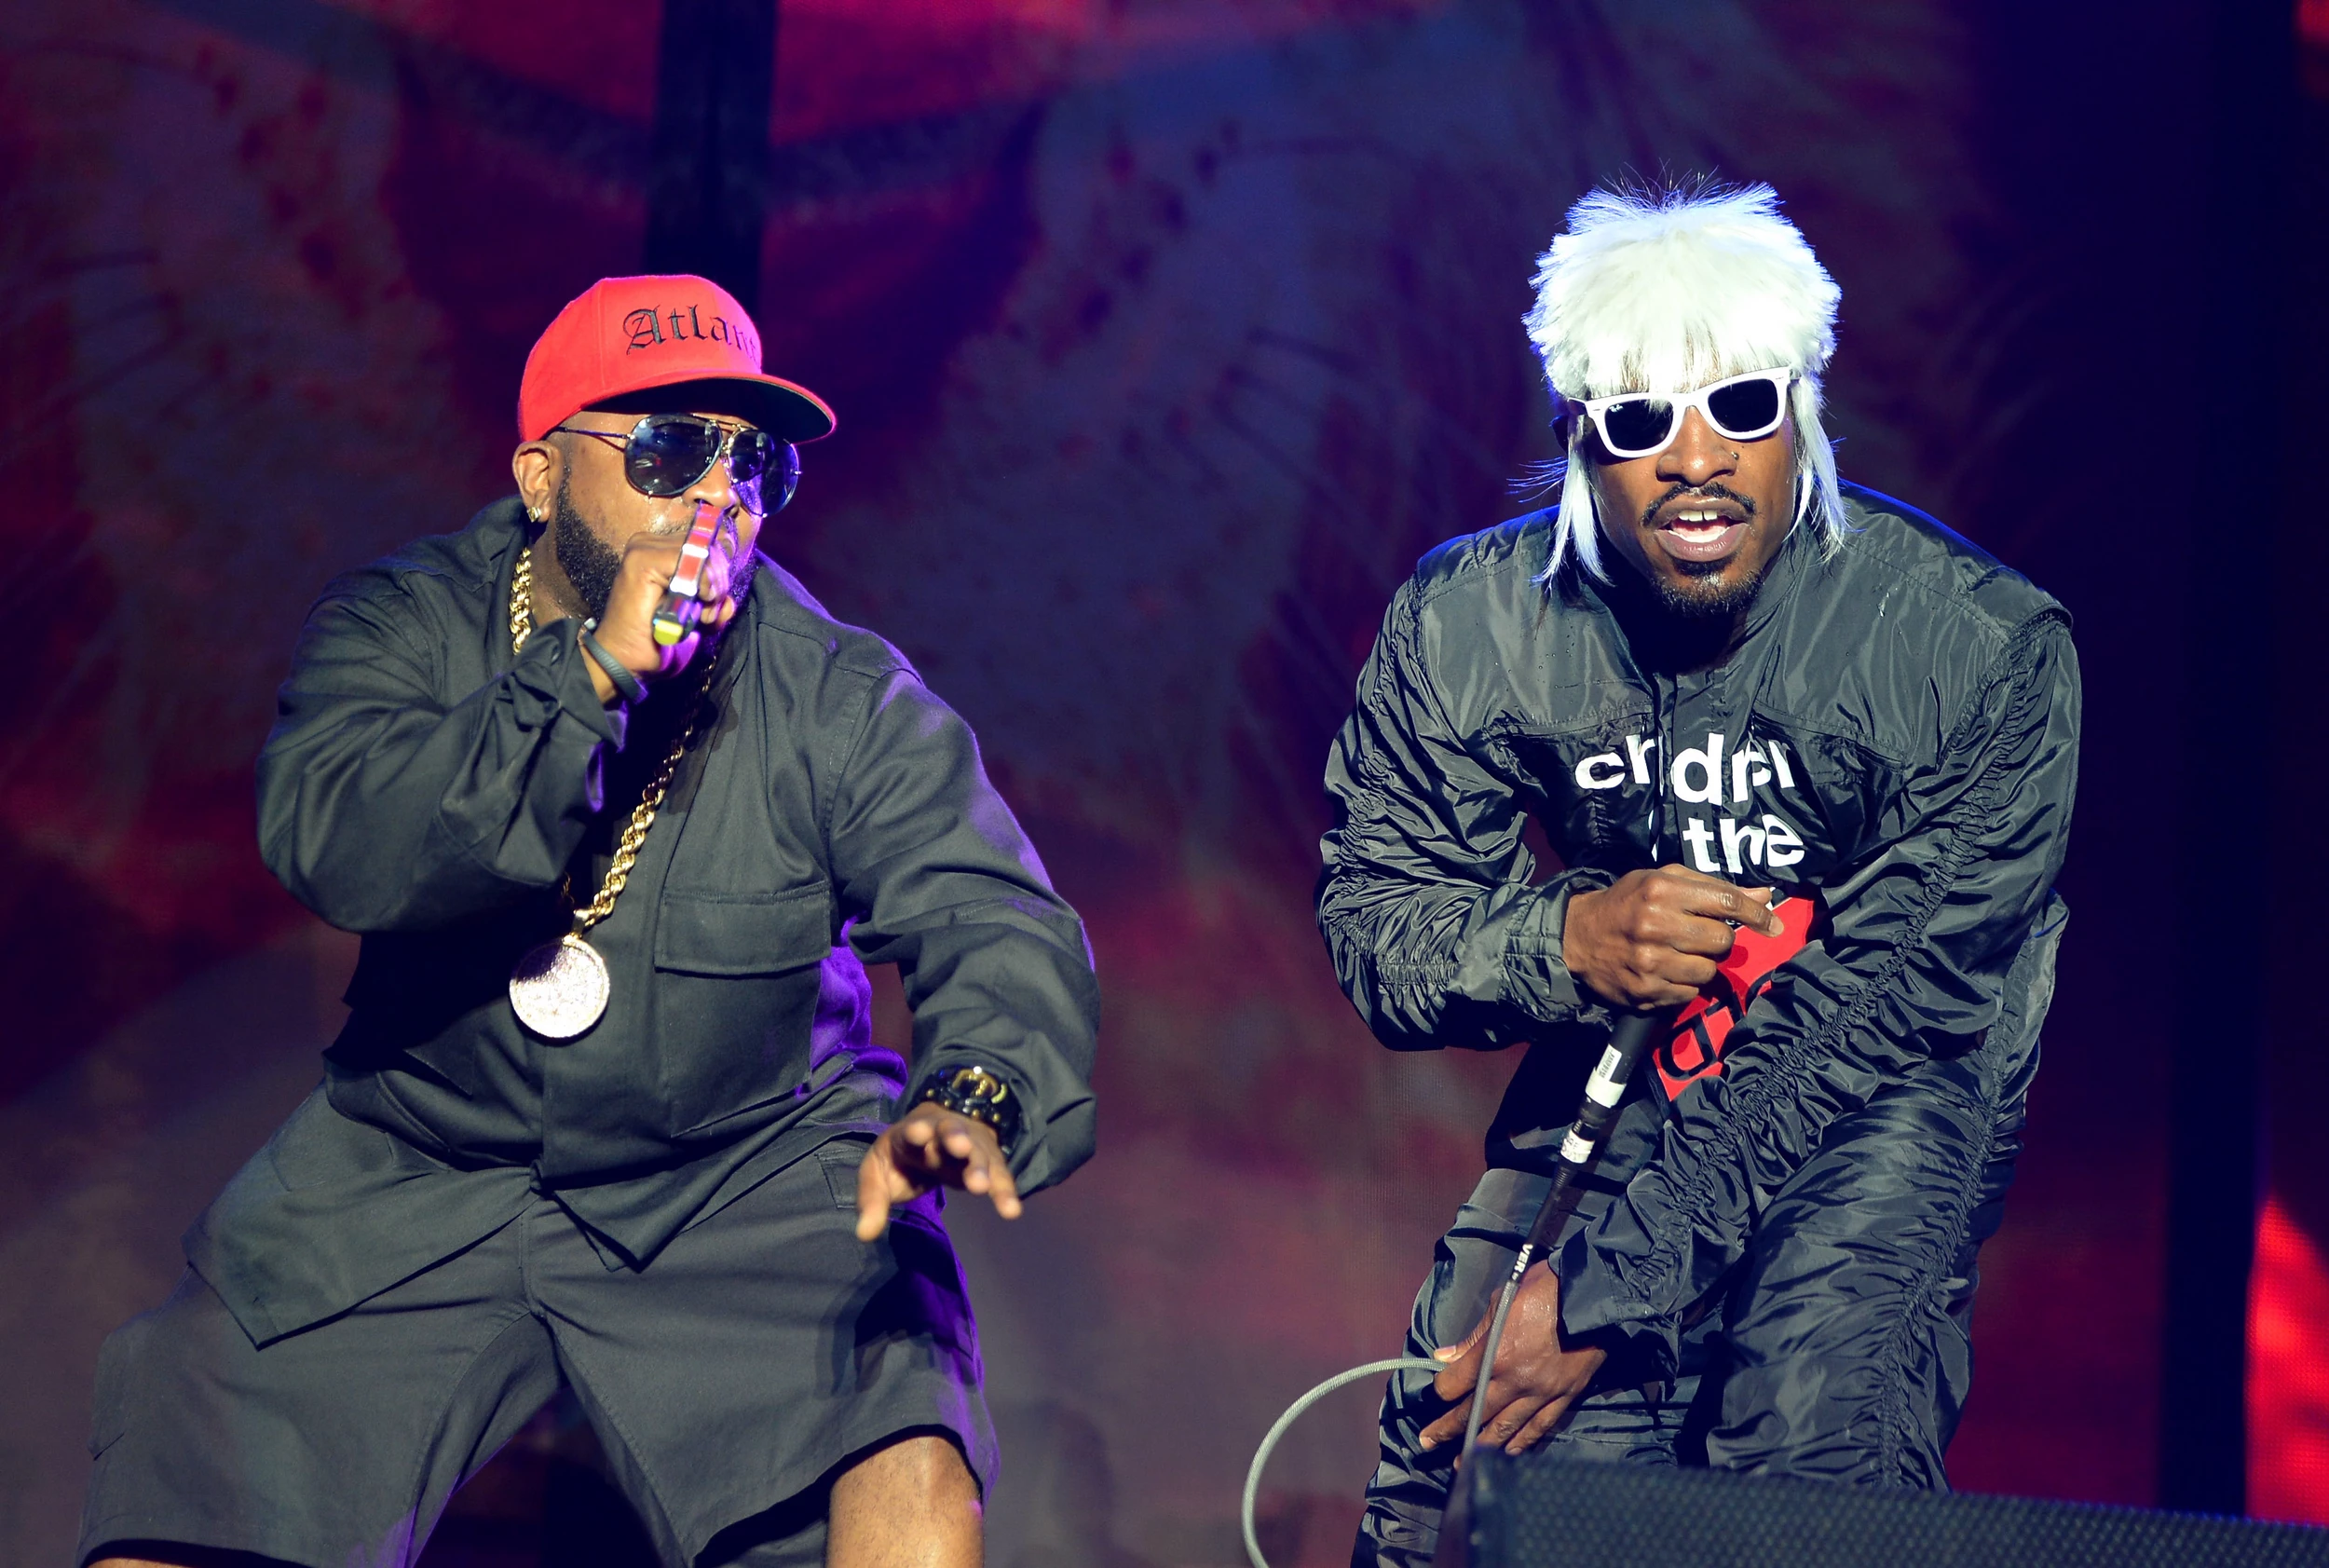 https://townsquare.media/site/812/files/2020/05/outkast1.jpg